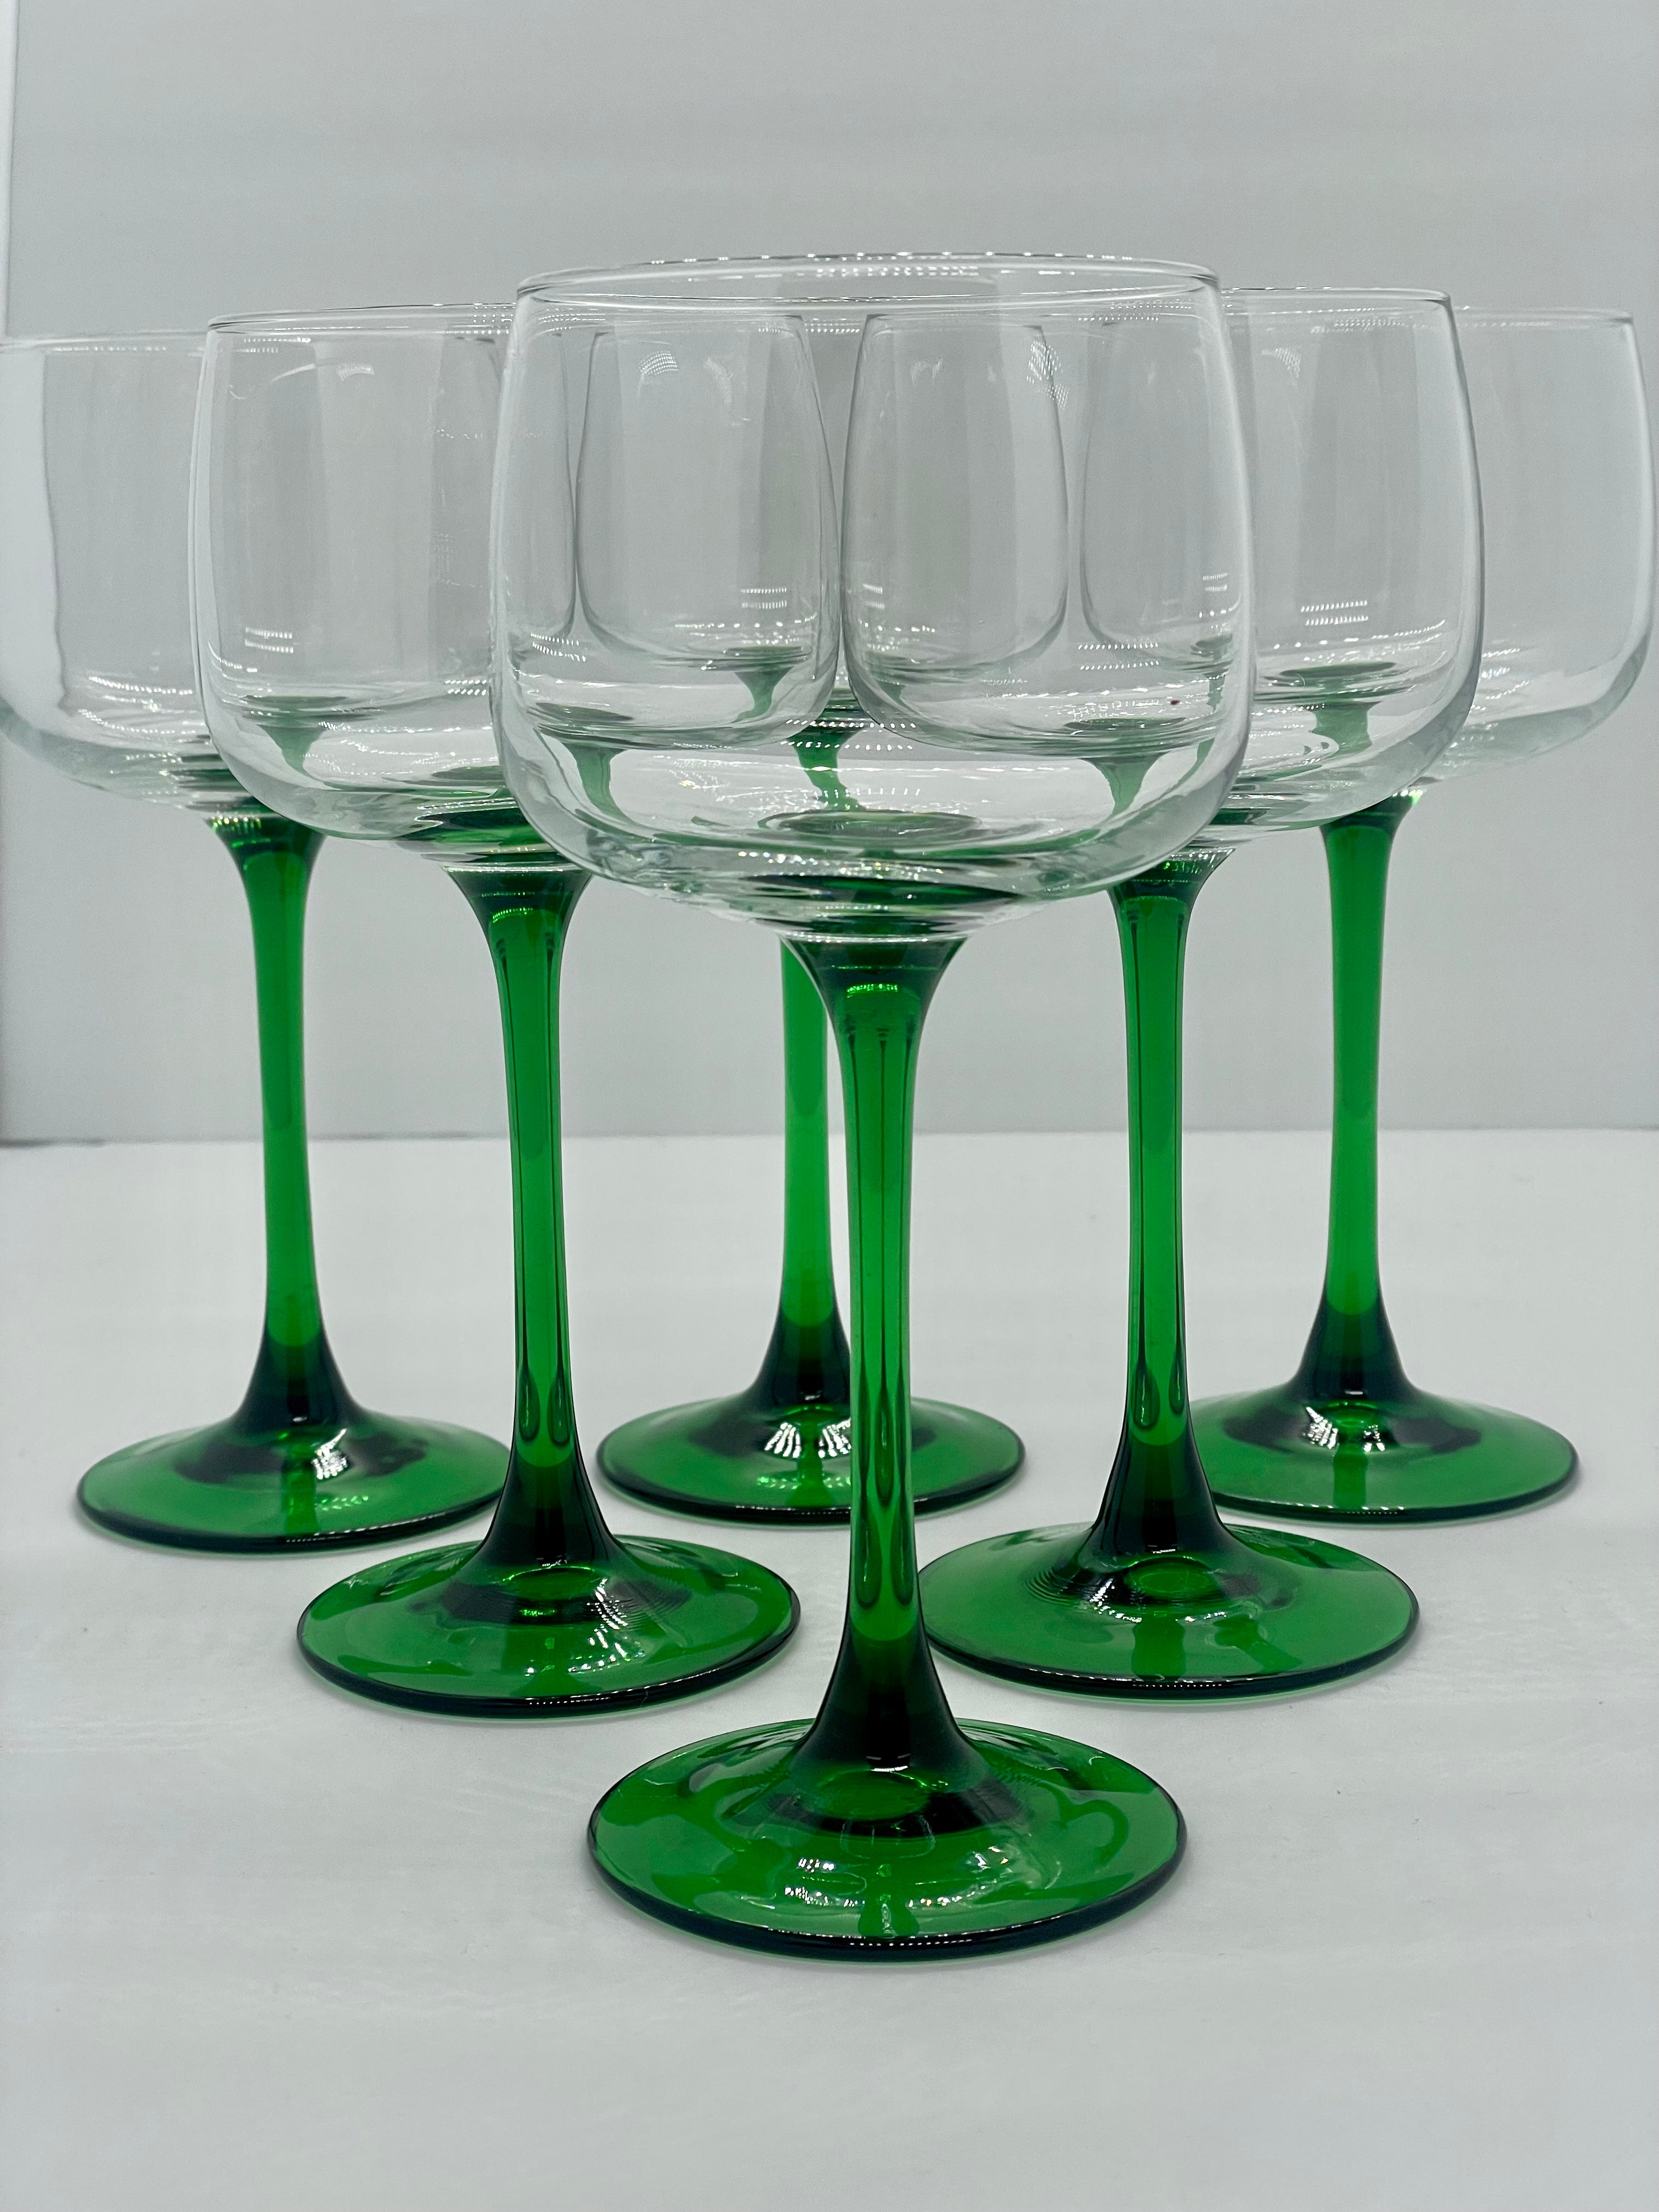 10 oz. Textured Beaded Sage Green Old Fashion Drinking Glasses (Set of